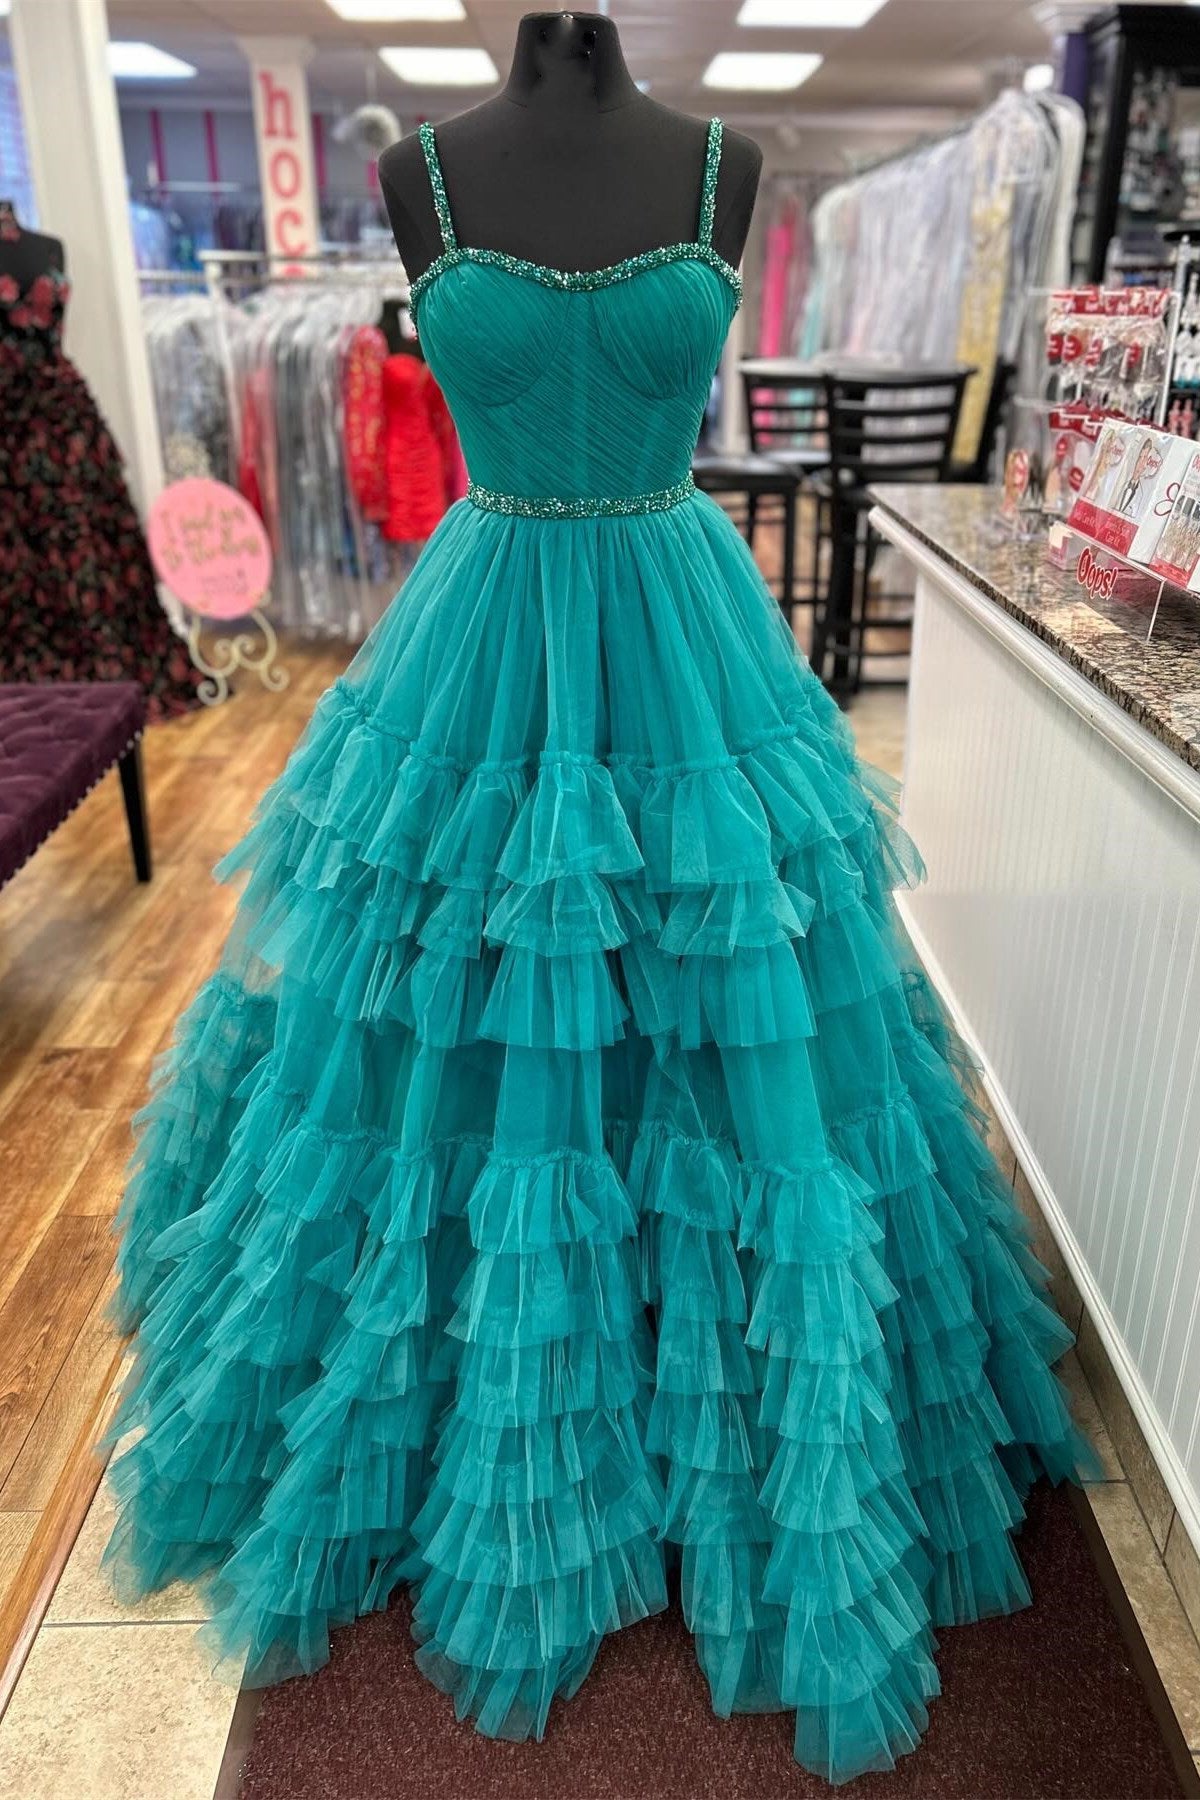 Tiered Ruffle Sweetheart Beaded Long Prom Dress in turquoise